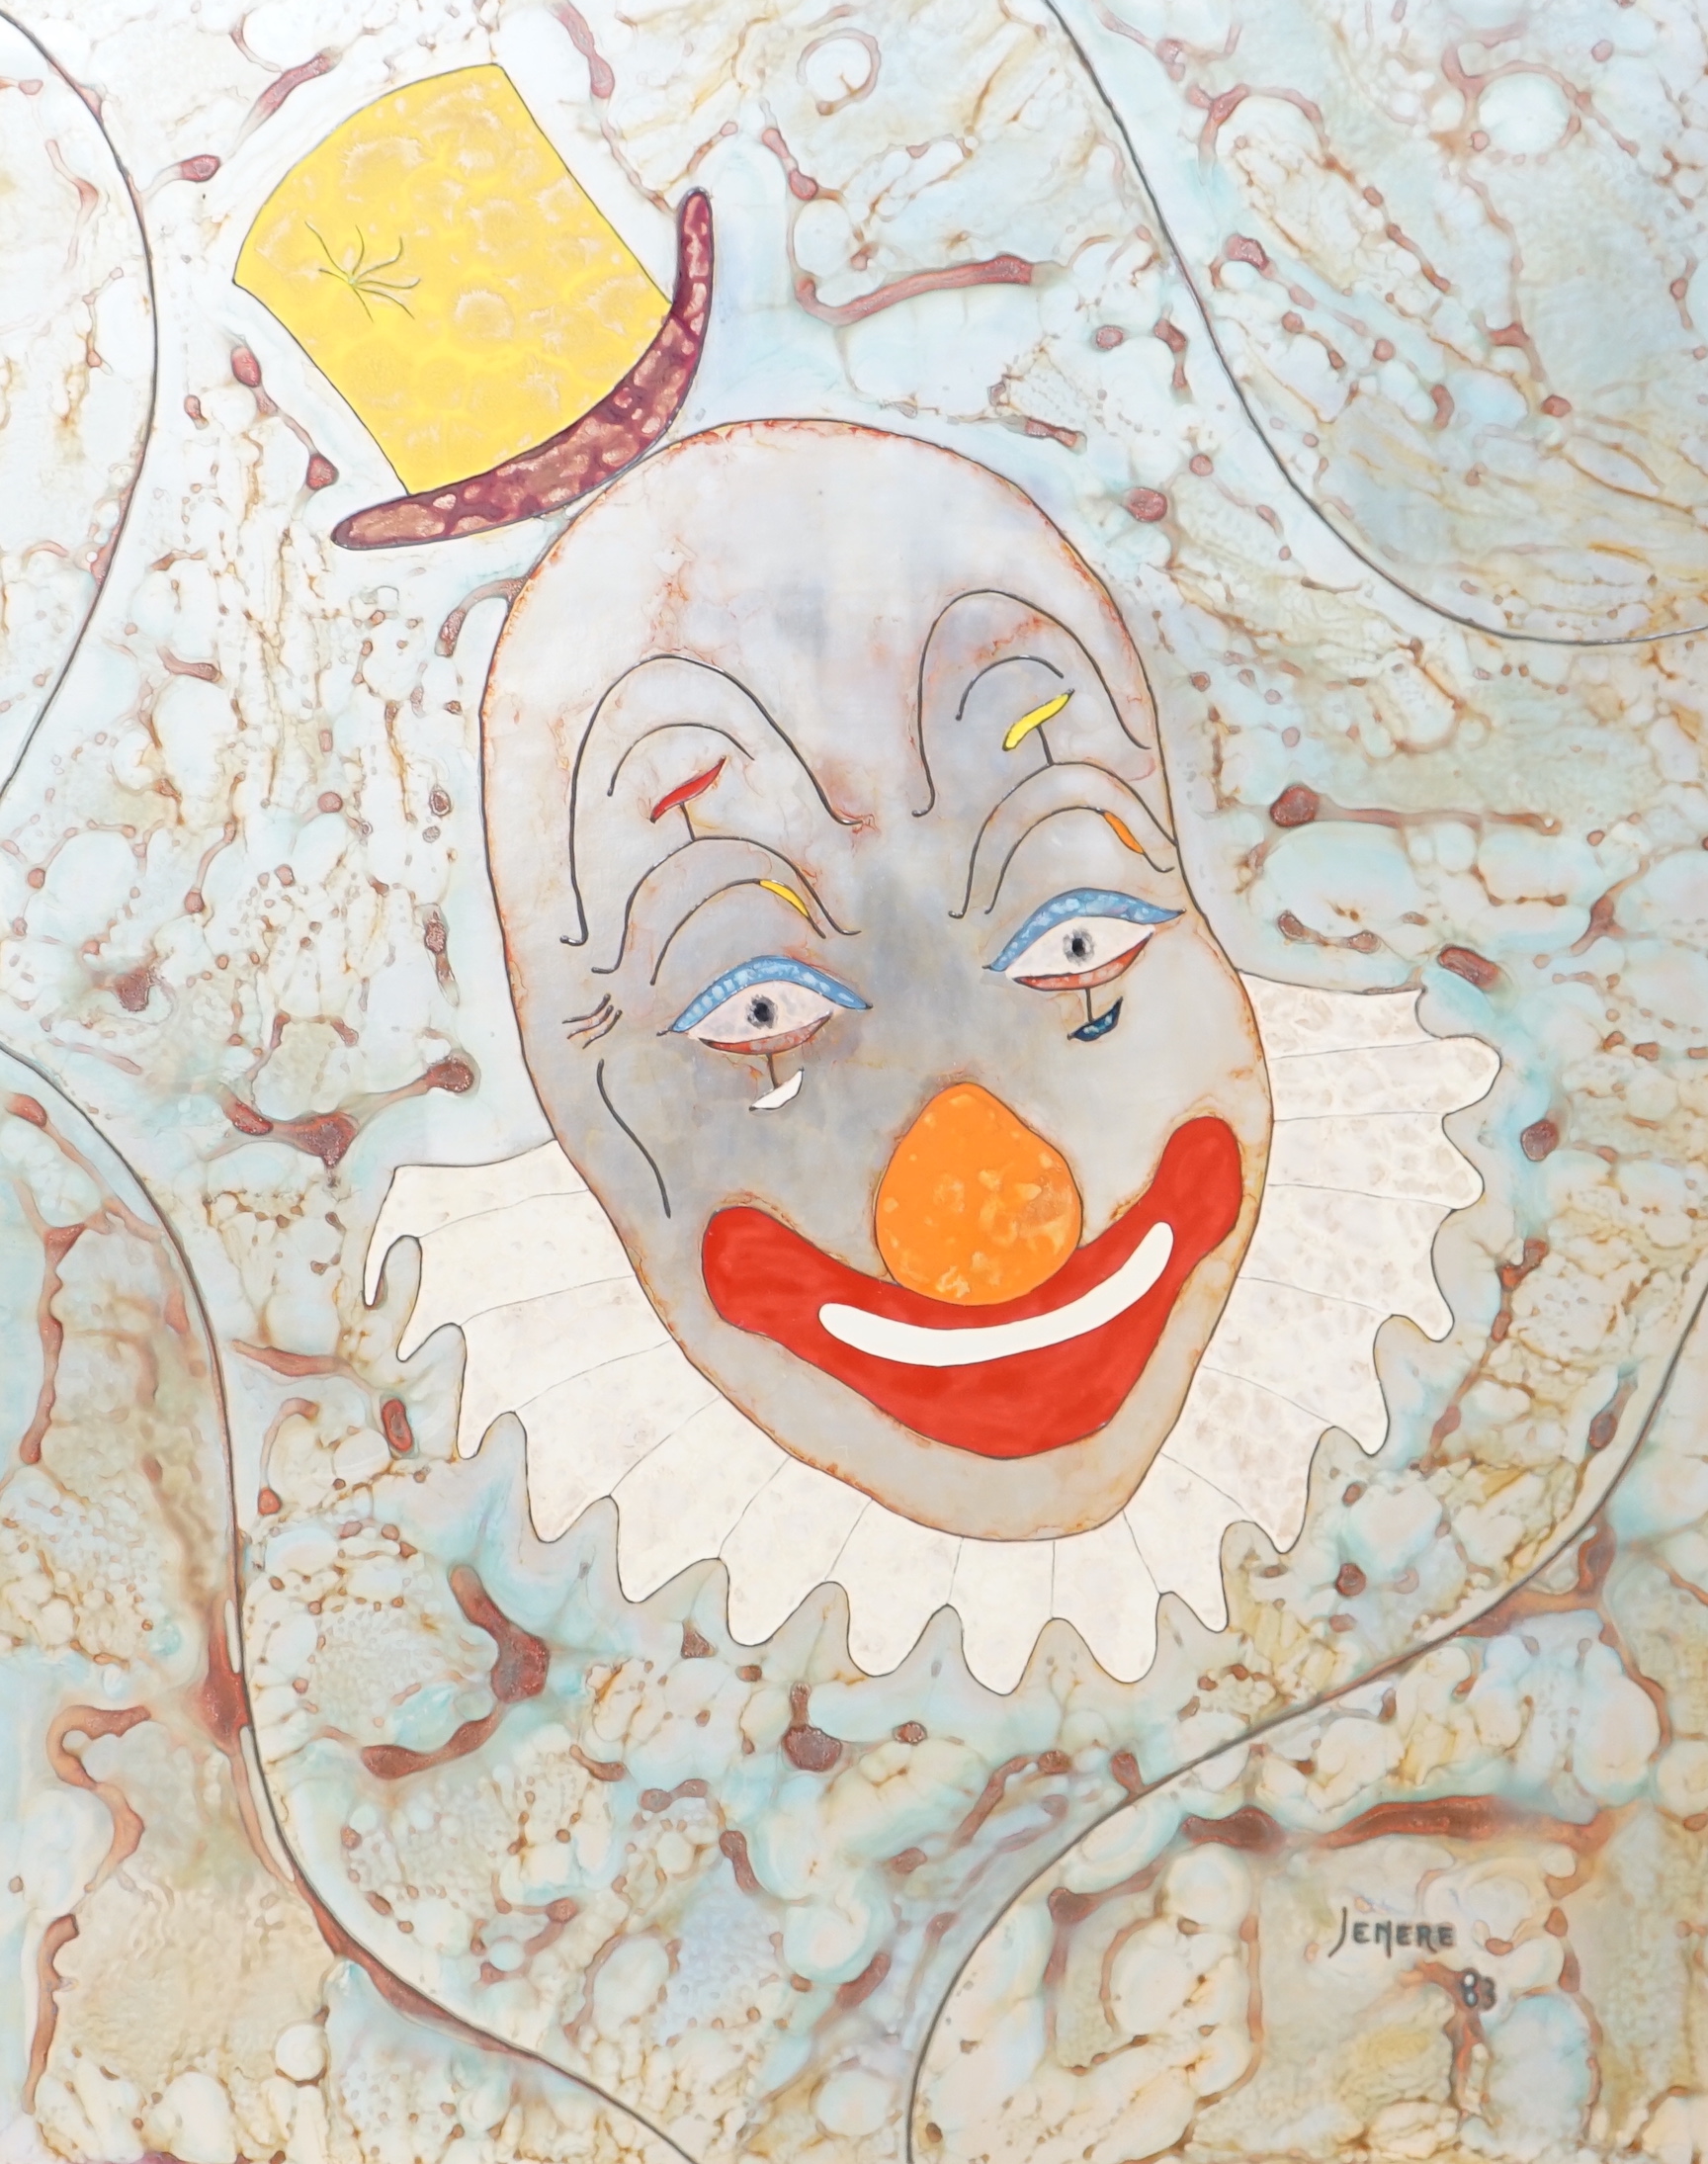 Jean-Philippe Jenere (French, b.1934), painted metal panel, 'Pierrot', signed and dated '83, 80 x 63cm. Provenance: Purchased Bangkok 1987